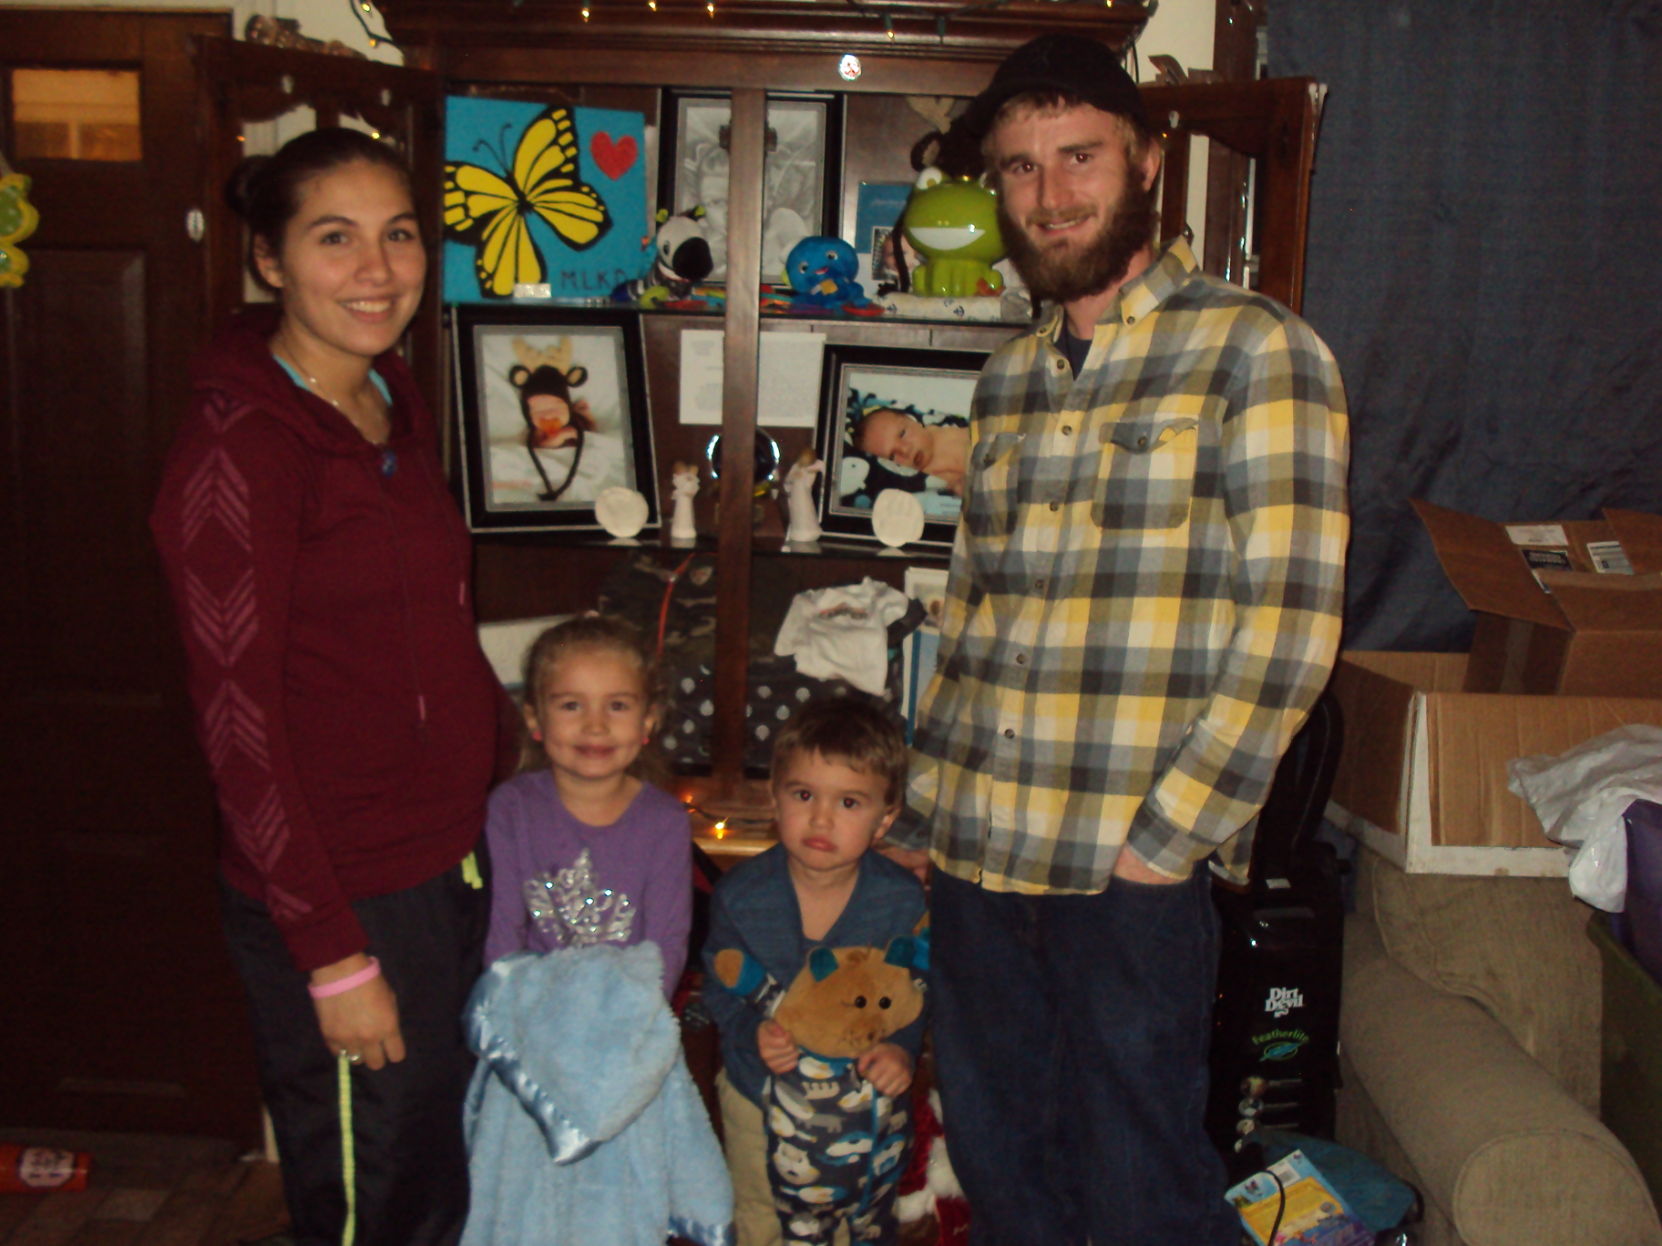 Wardtown Mobile Home Park Co-op's Patricia and Todd Donahue and their children, Raelyn, left, and Tripp, with keepsakes from Mason Donahue, who died at 36 days old from sudden infant death syndrome in May.